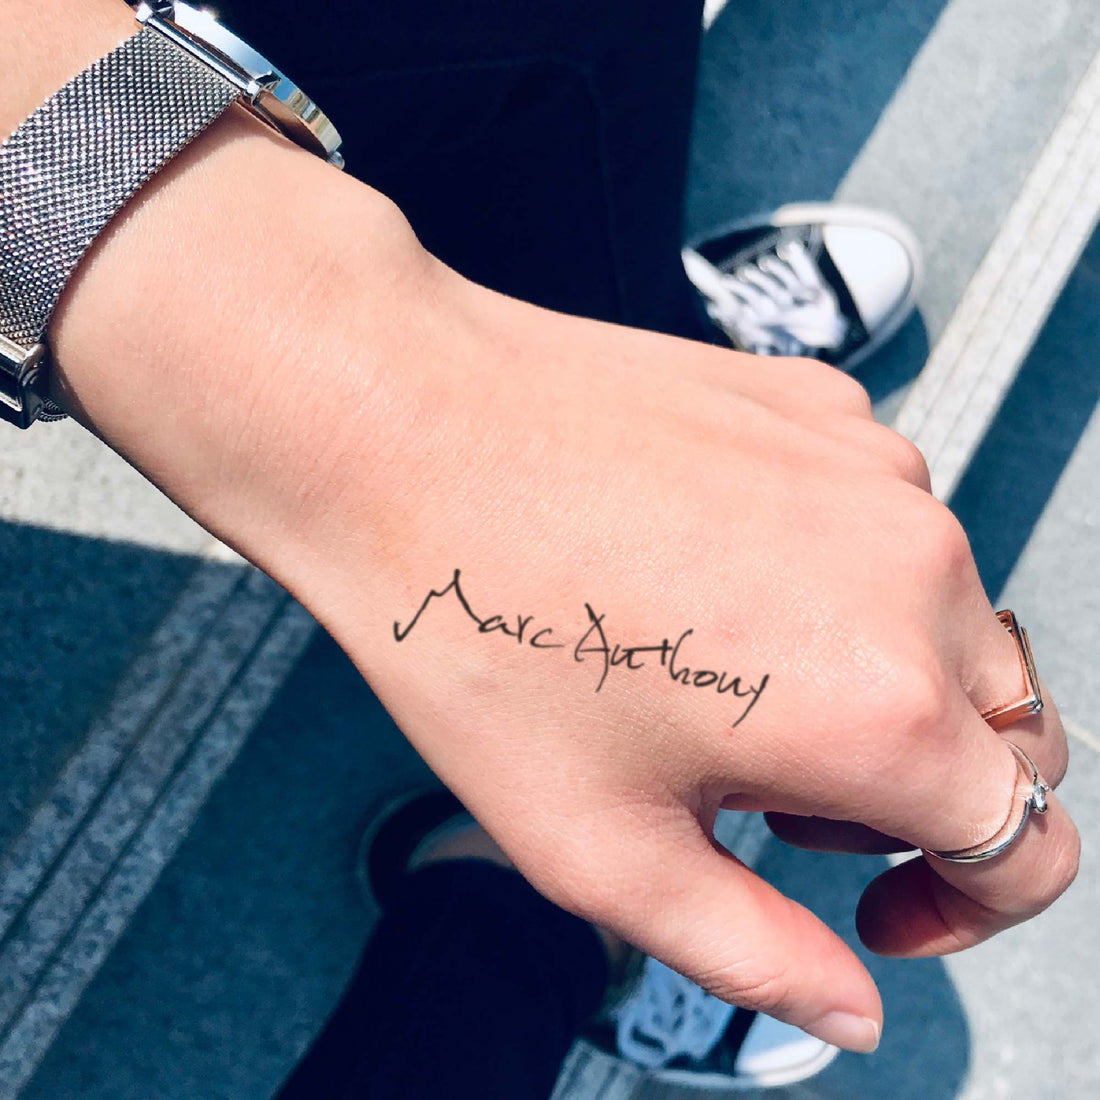 Marc Anthony custom temporary tattoo sticker design idea inspiration meanings removal arm wrist hand words font name signature calligraphy lyrics tour concert outfits merch accessory gift souvenir costumes wear dress up code